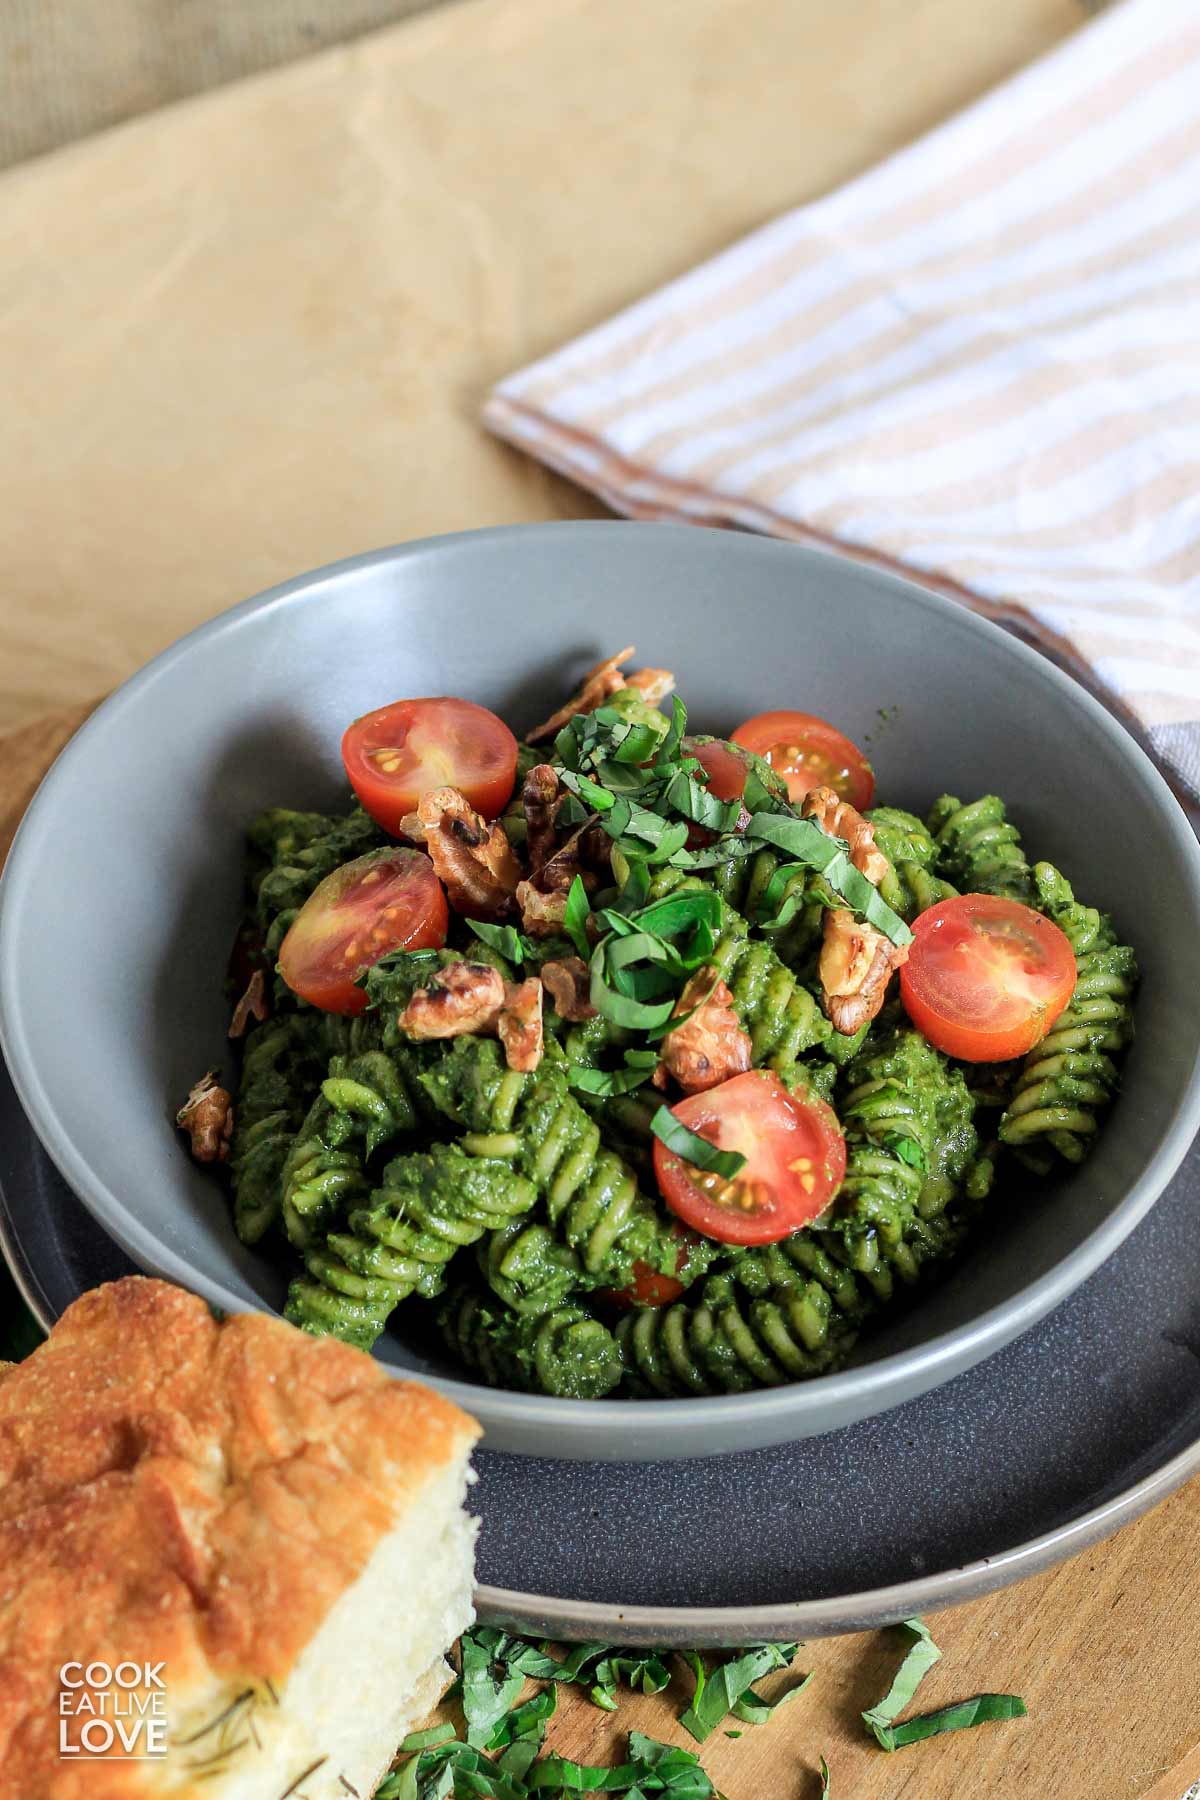 A bowl of spinach pesto pasta on the table with a napkin and piece of bread on the side.